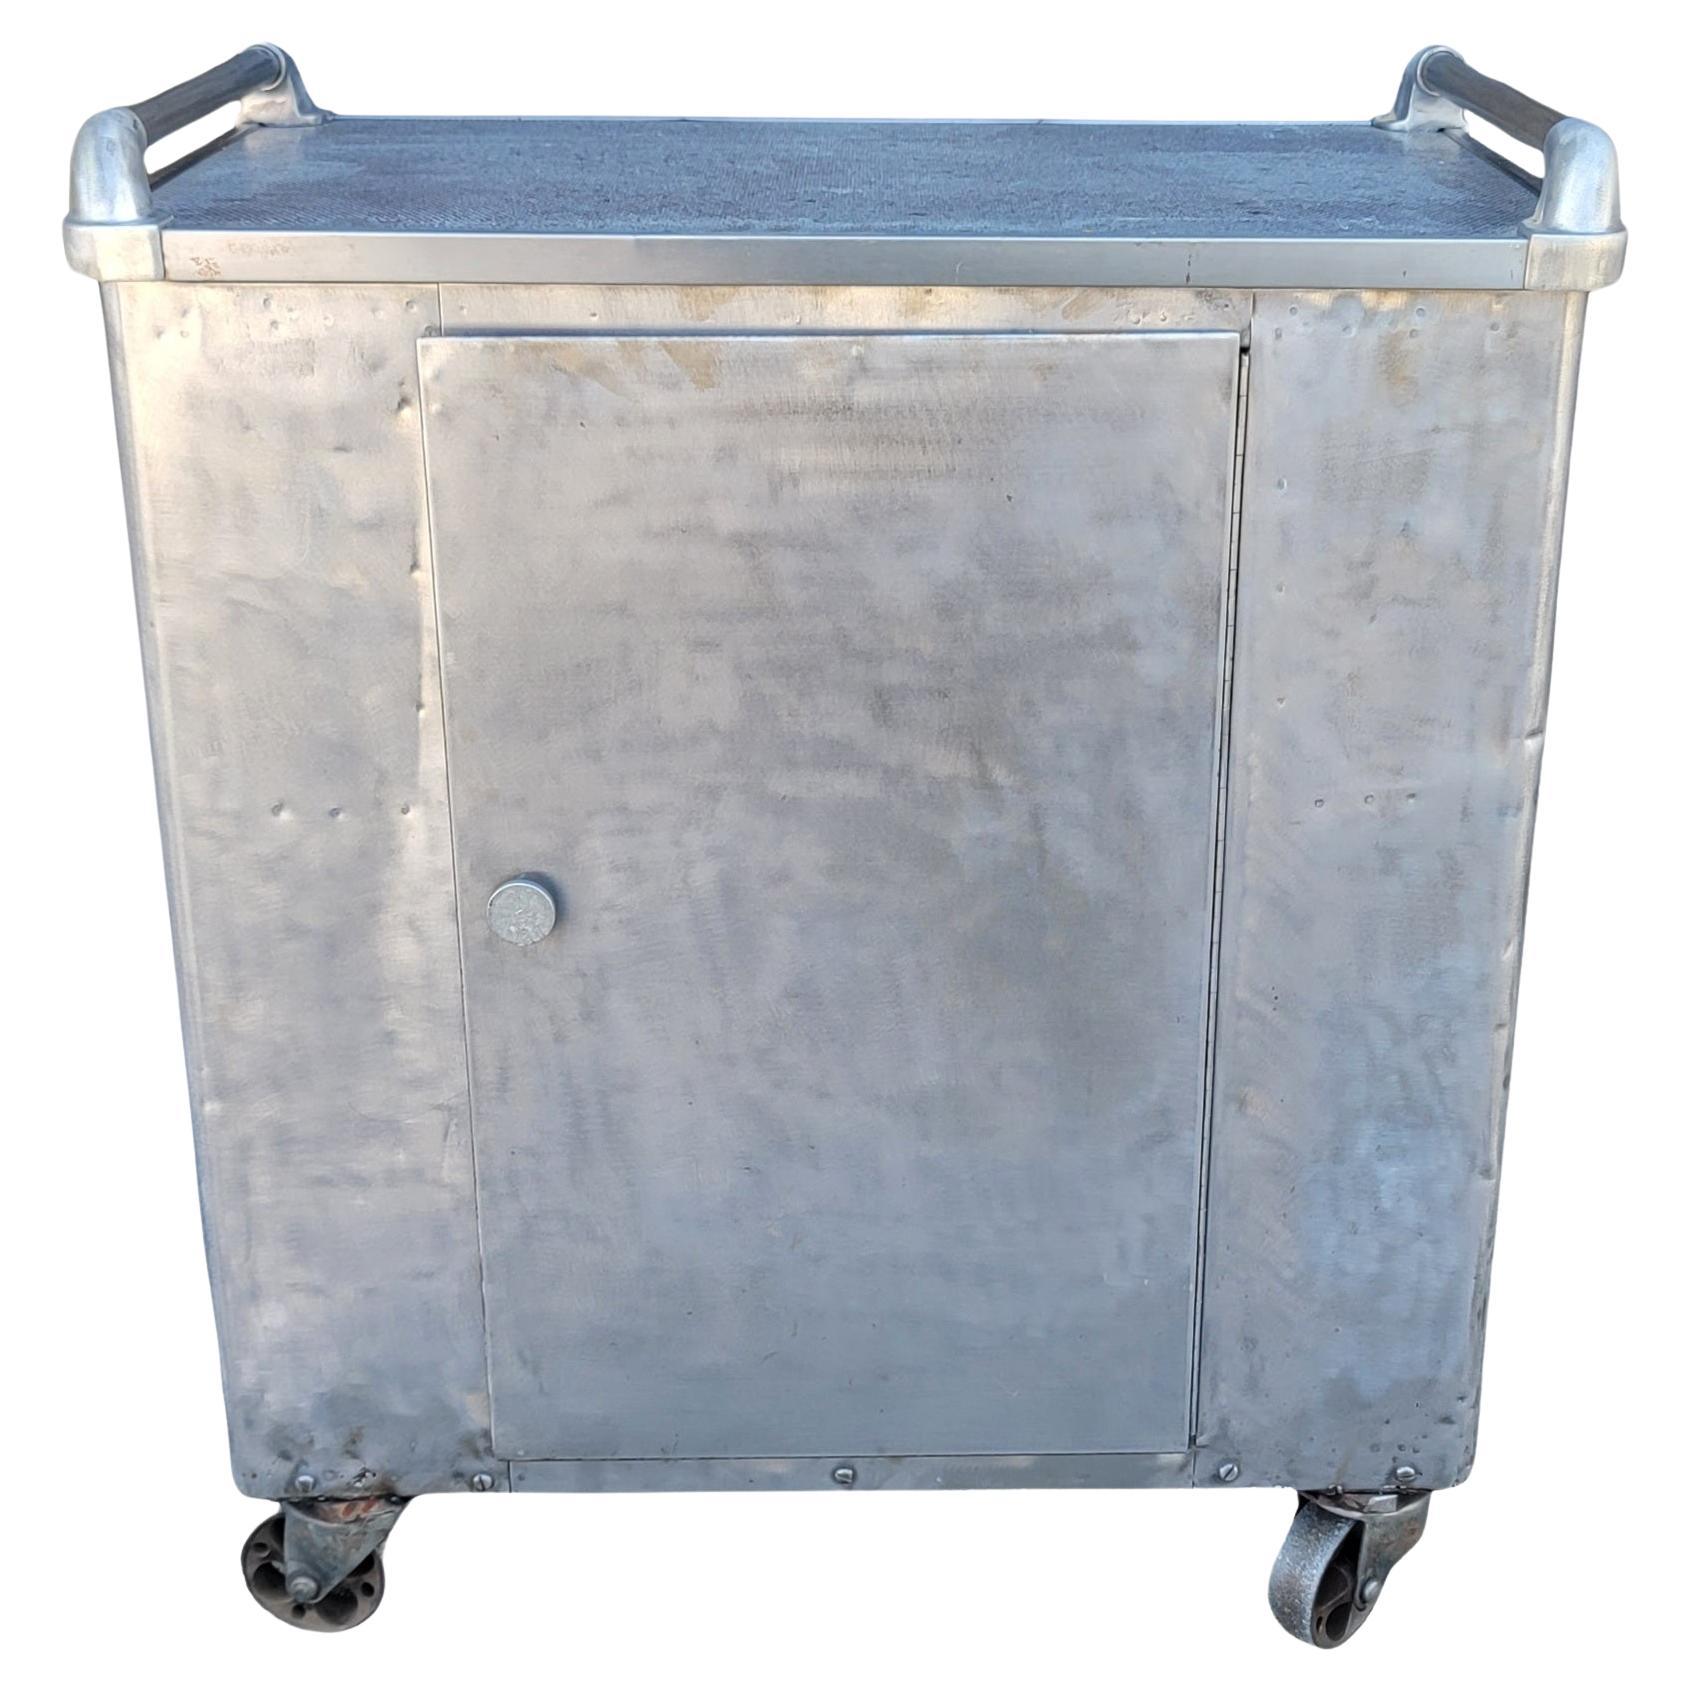 60s Industrial Tanker Style Tol Base Cast Iron Caseium  Cart Trolley. The casters are made from steel to hold the weight of the cast. There is one door with 2 shelves on the interior. The sides have pockets to place items in. Within these pockets